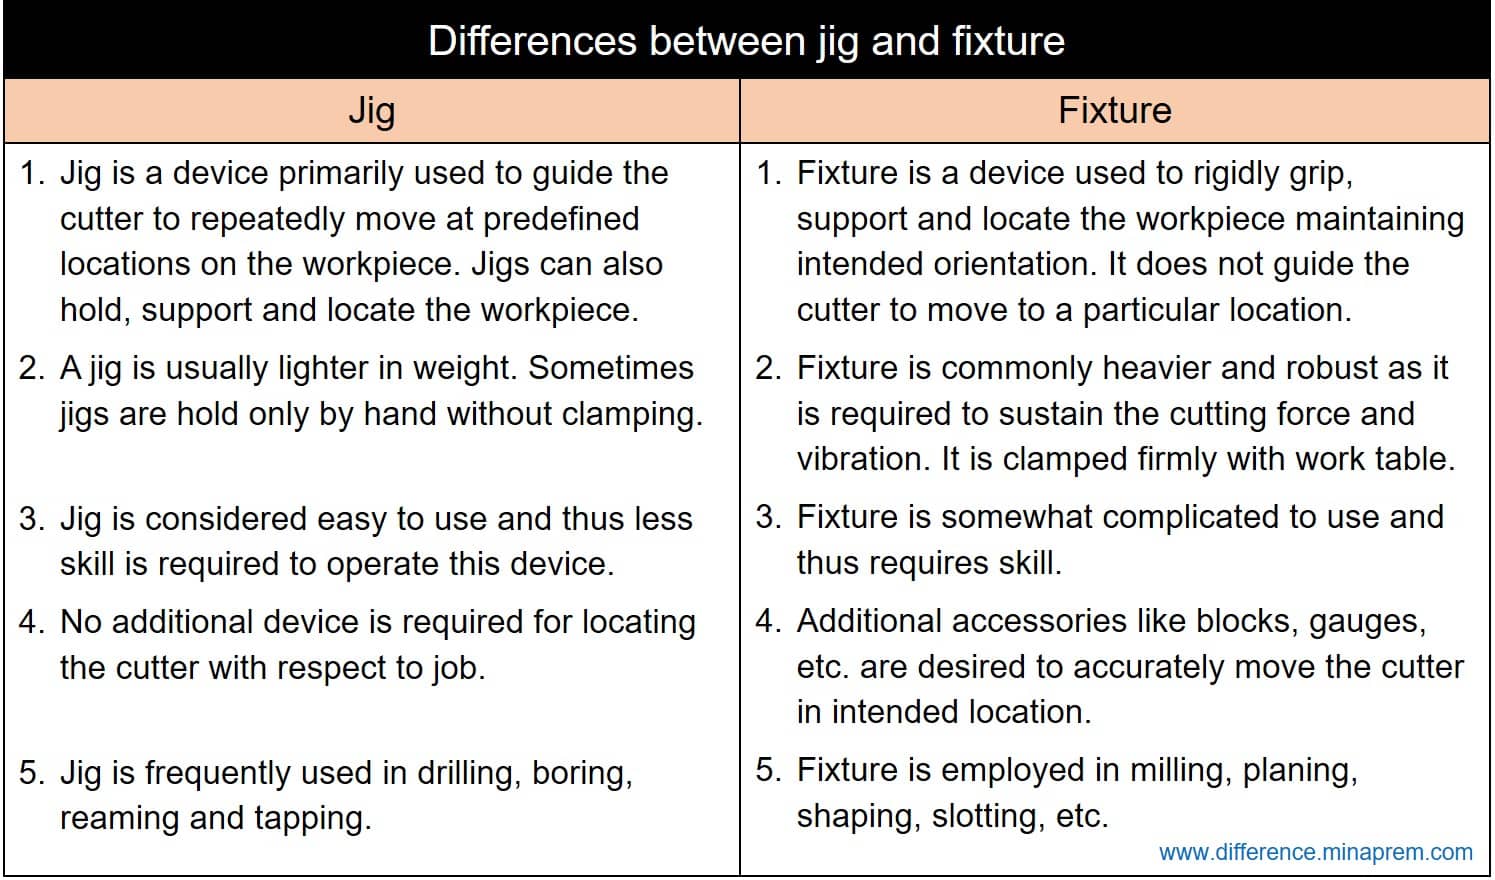 http://www.difference.minaprem.com/wp-content/uploads/2019/06/Differences-between-jig-and-fixture.jpg